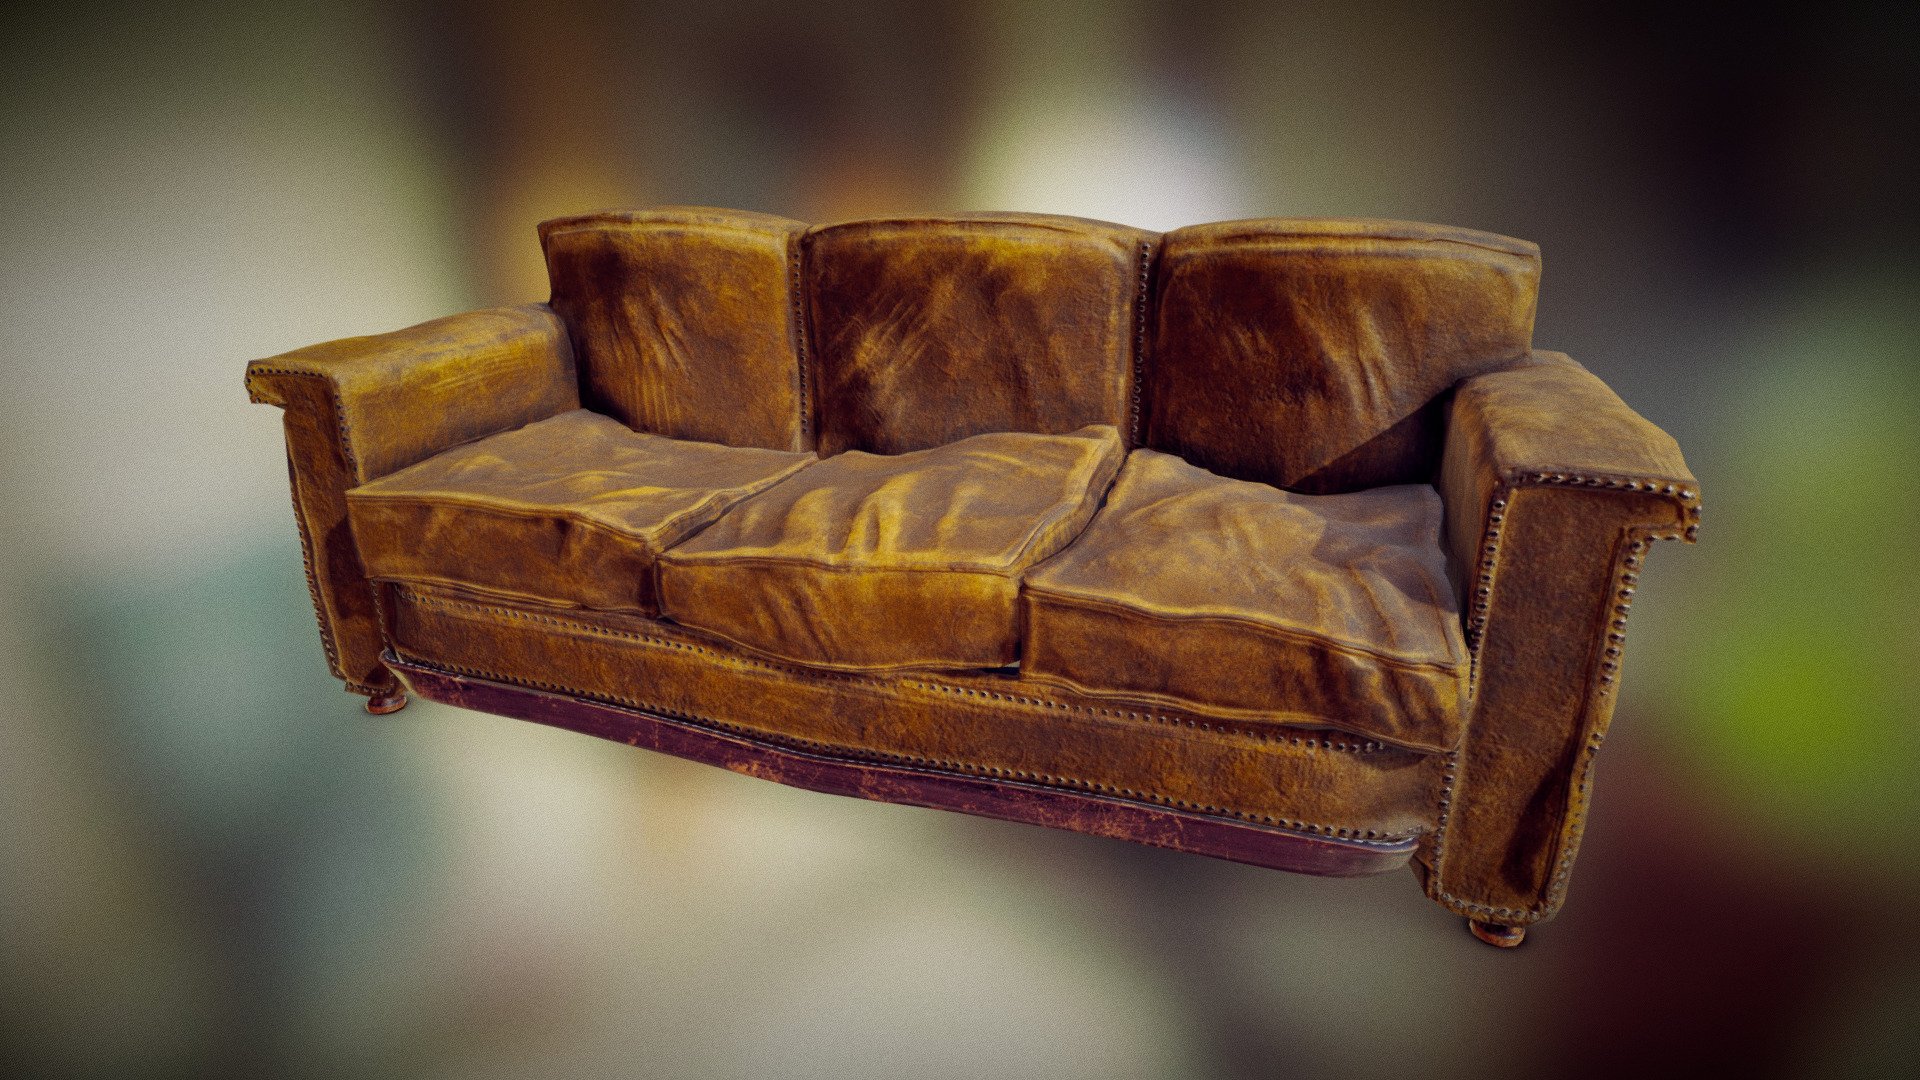 A Dingy Sofa
PBR Textures, well used sofa its had countless owners and been both loved and hated at various points
*Please also leave a like and follow me if you download it I would appreciate that *
Thanks - Worn Leather Sofa / Couch / Setee | Game Ready - Buy Royalty Free 3D model by takerefuge84 3d model